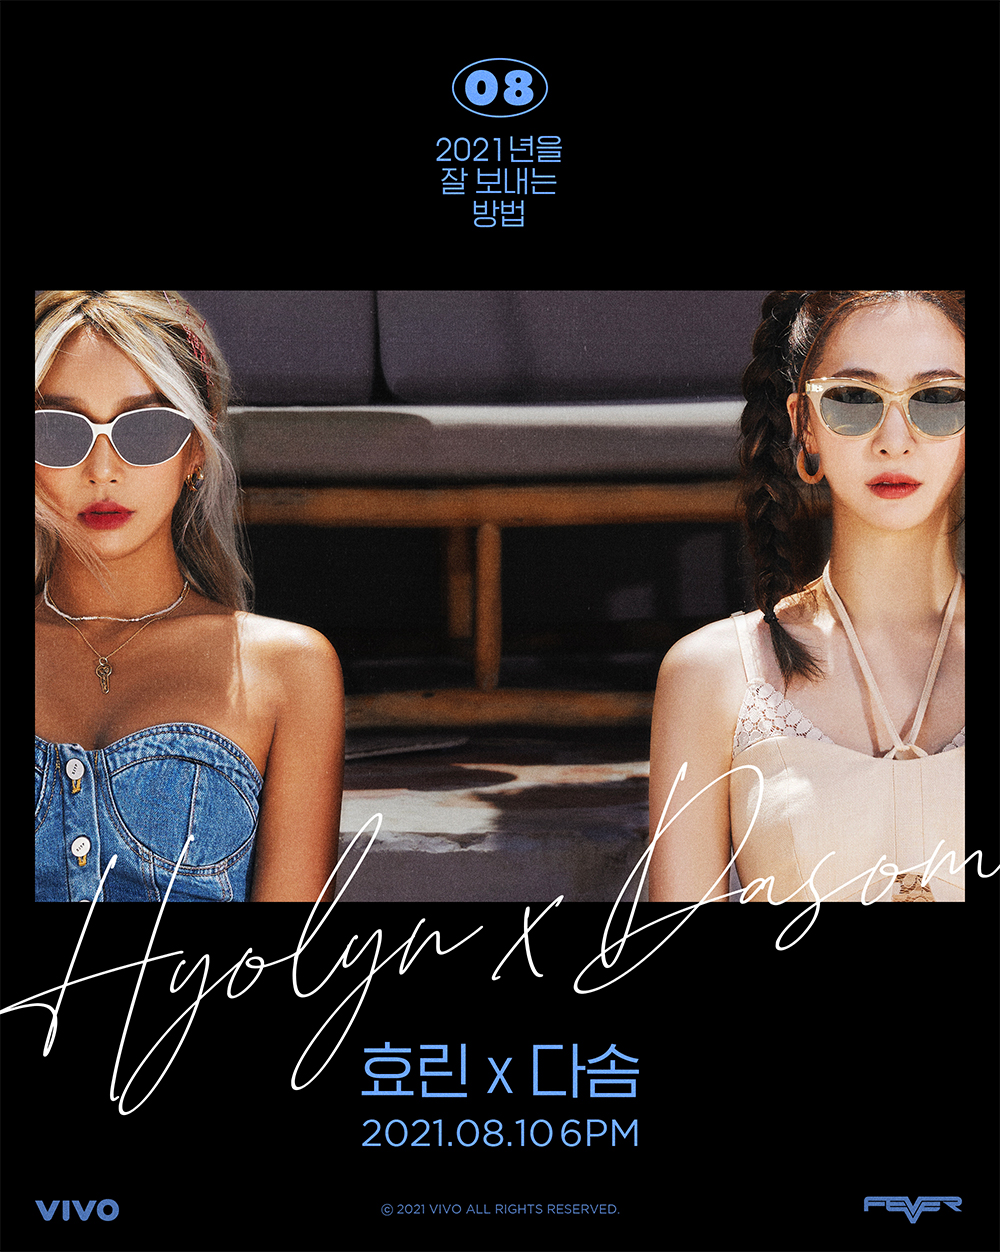 Hyolyn x Da-som heralds a powerful blow in the sweltering heat… Album teaser released